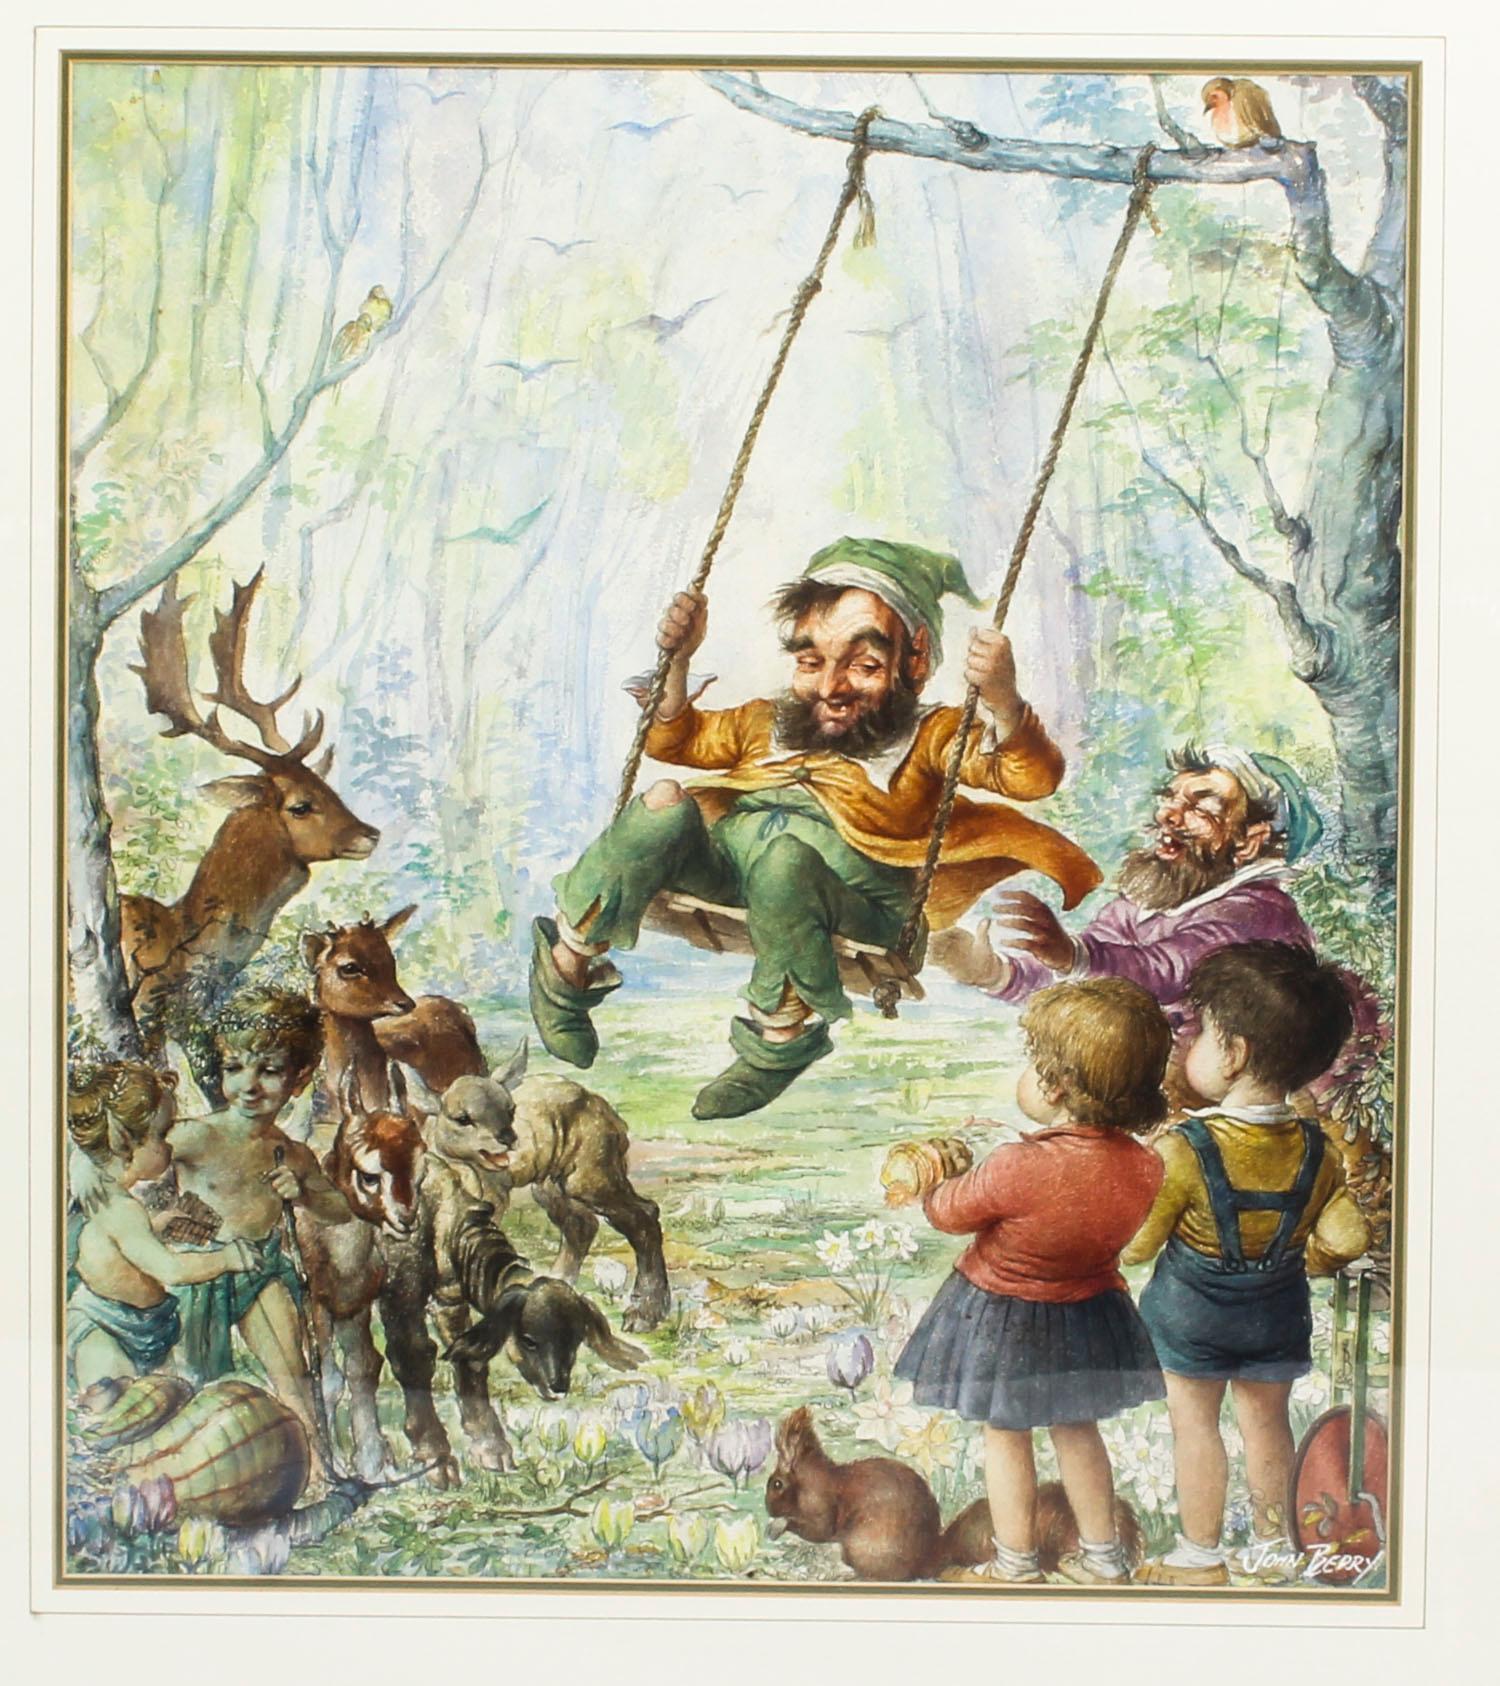 A large lovely vintage watercolor by John Berry of Rumpelstiltskin, circa 1960 in date.

The watercolor features Rumpelstiltskin sitting on a swing in a forest surrounded by children and forest animals.

Provenance: Malvern Wells Gallery,